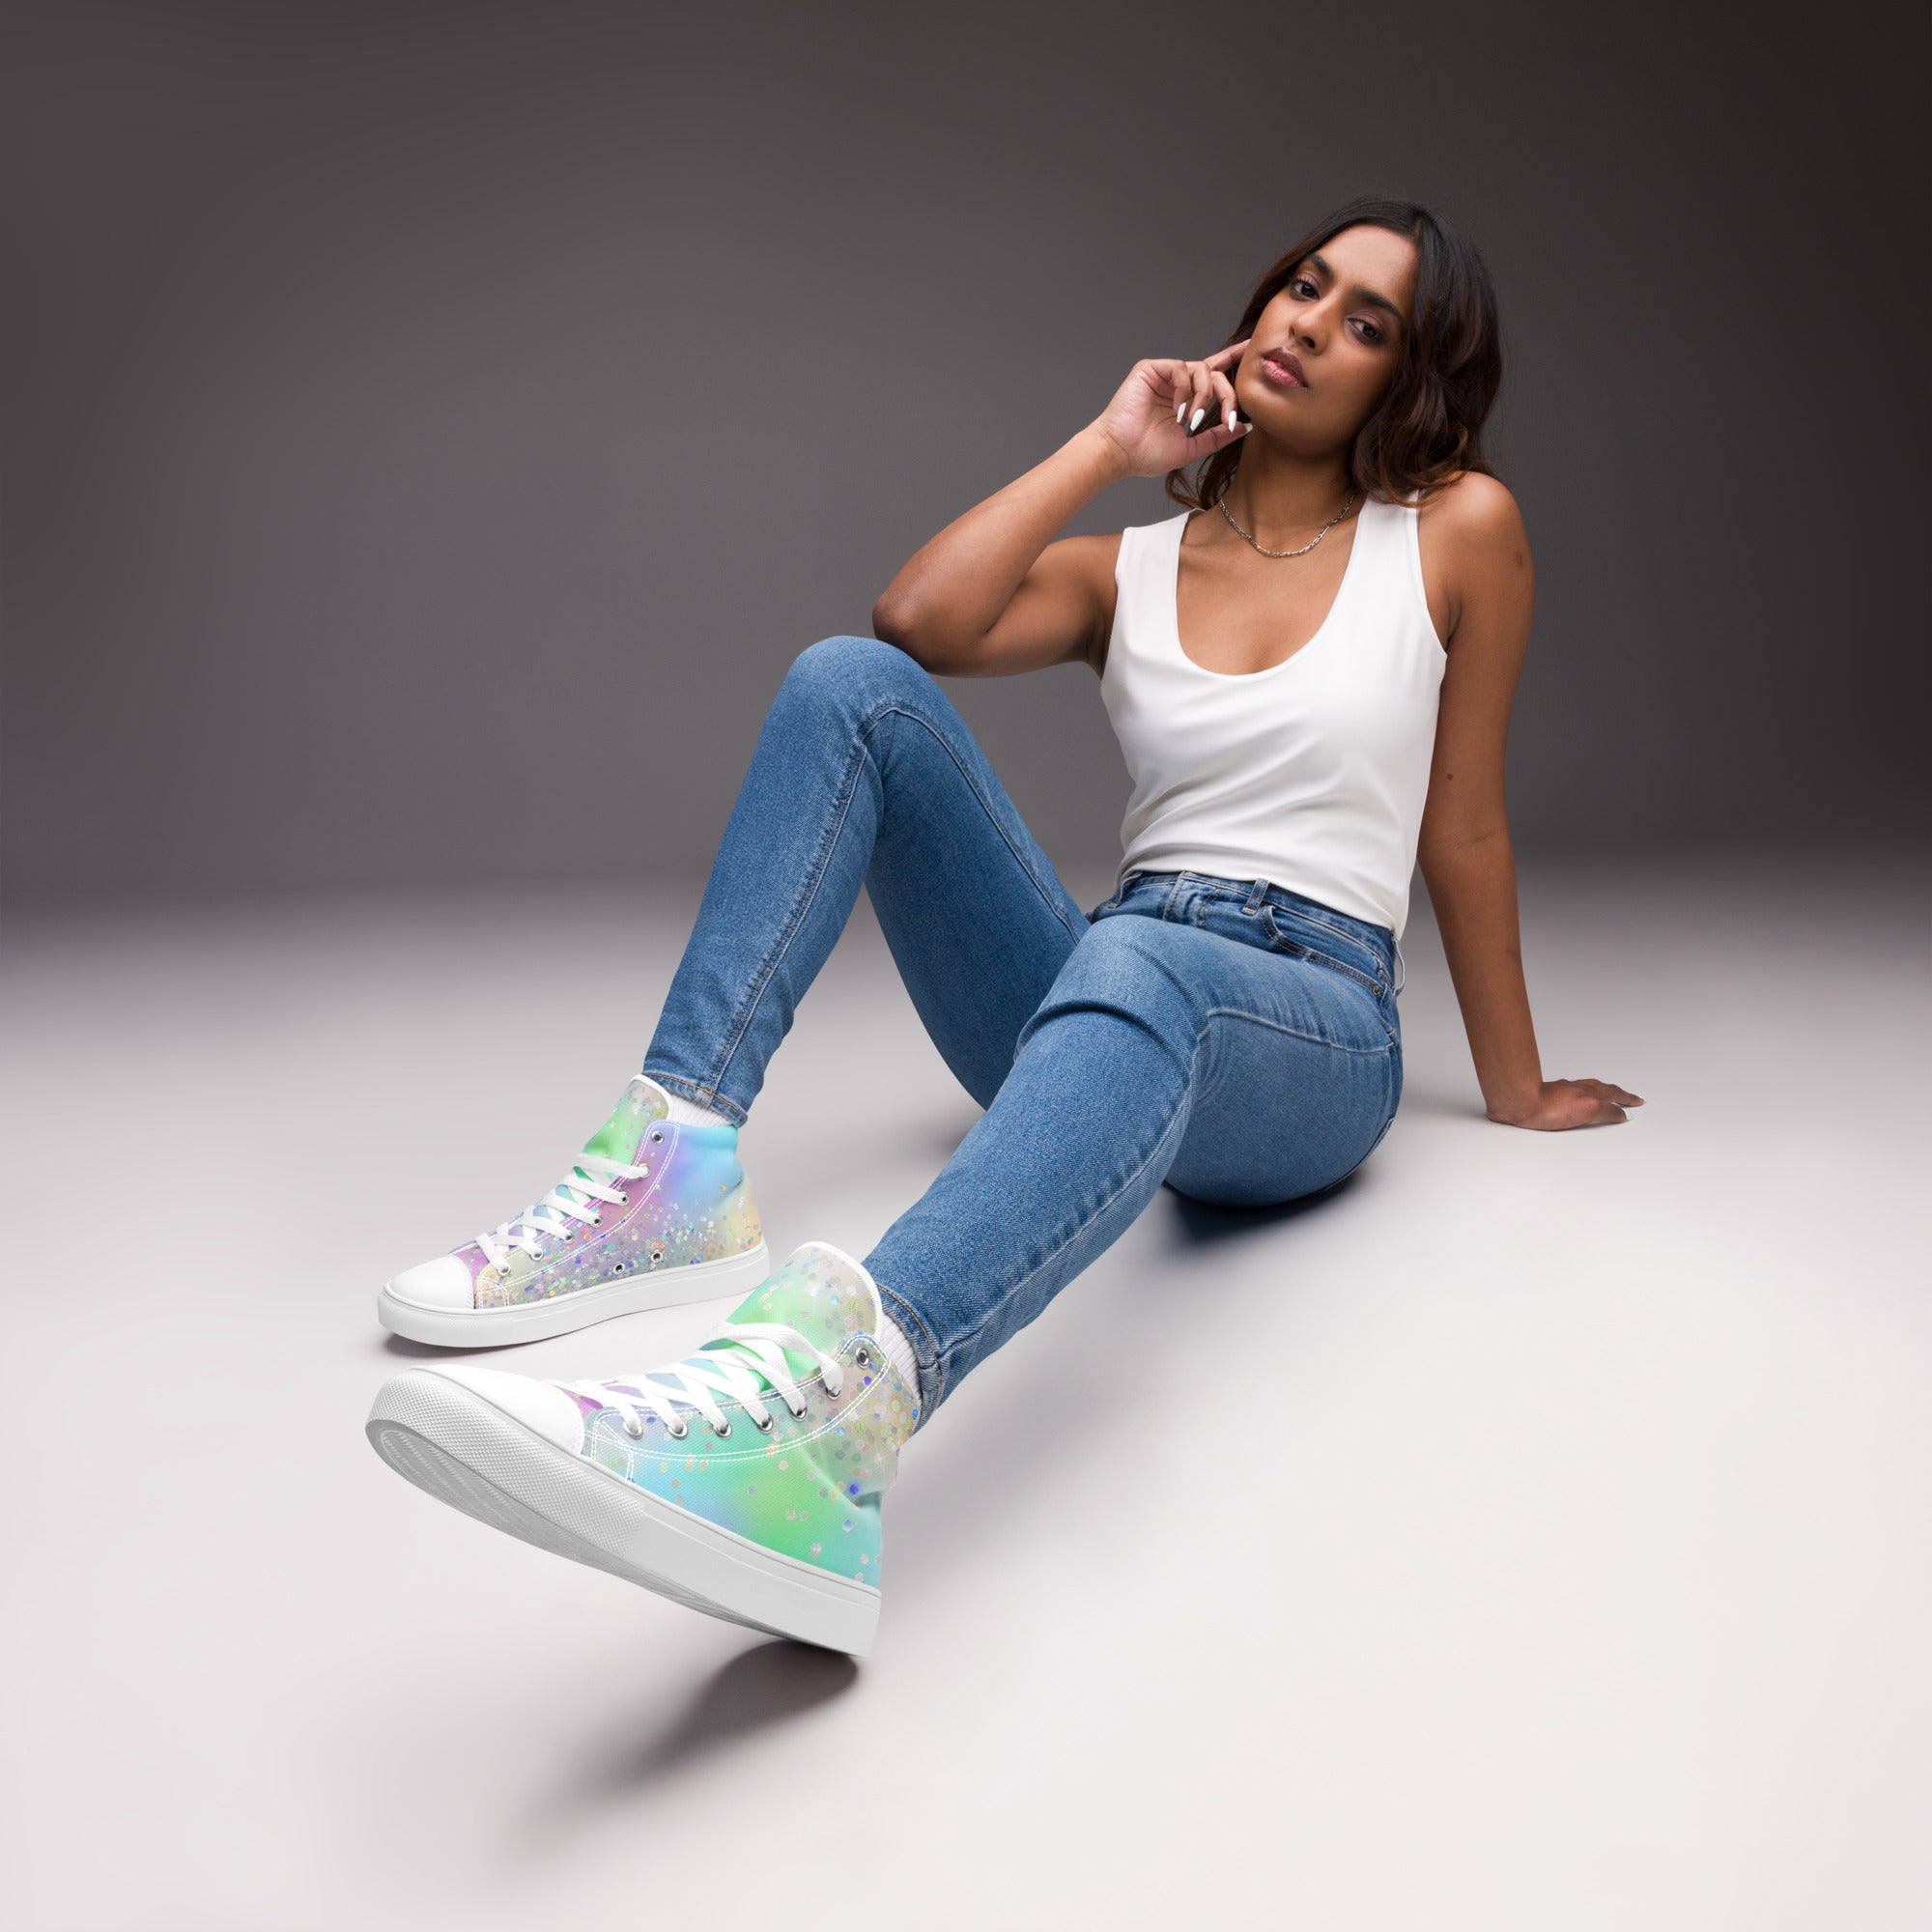 Women’s high top canvas shoes- Rainbow Holographic Glitter